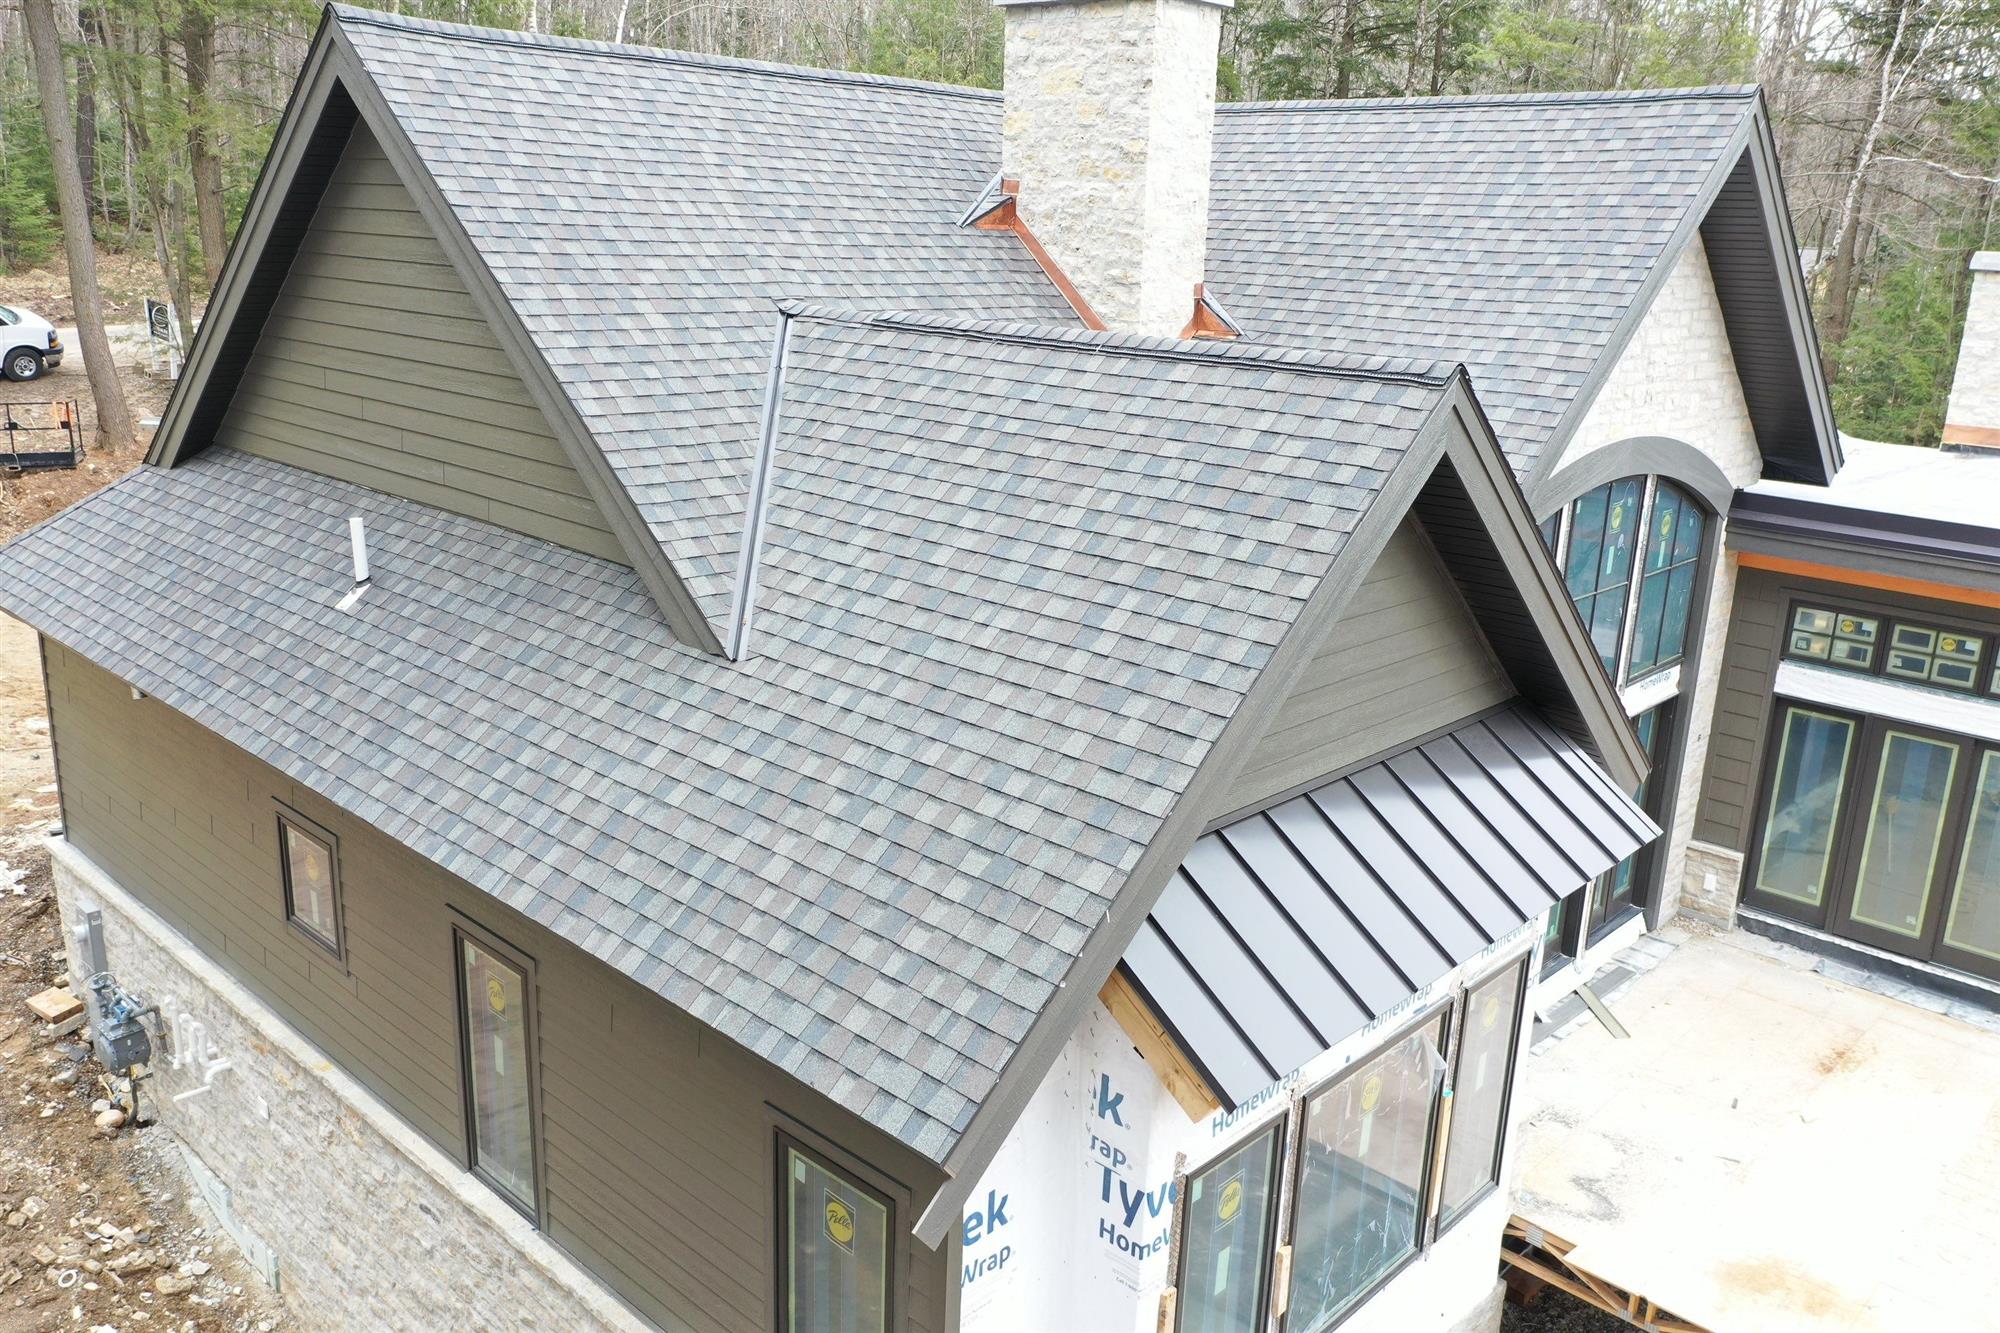 House in the Wood with new Asphalt Shingles installed by Overhead Solutions.